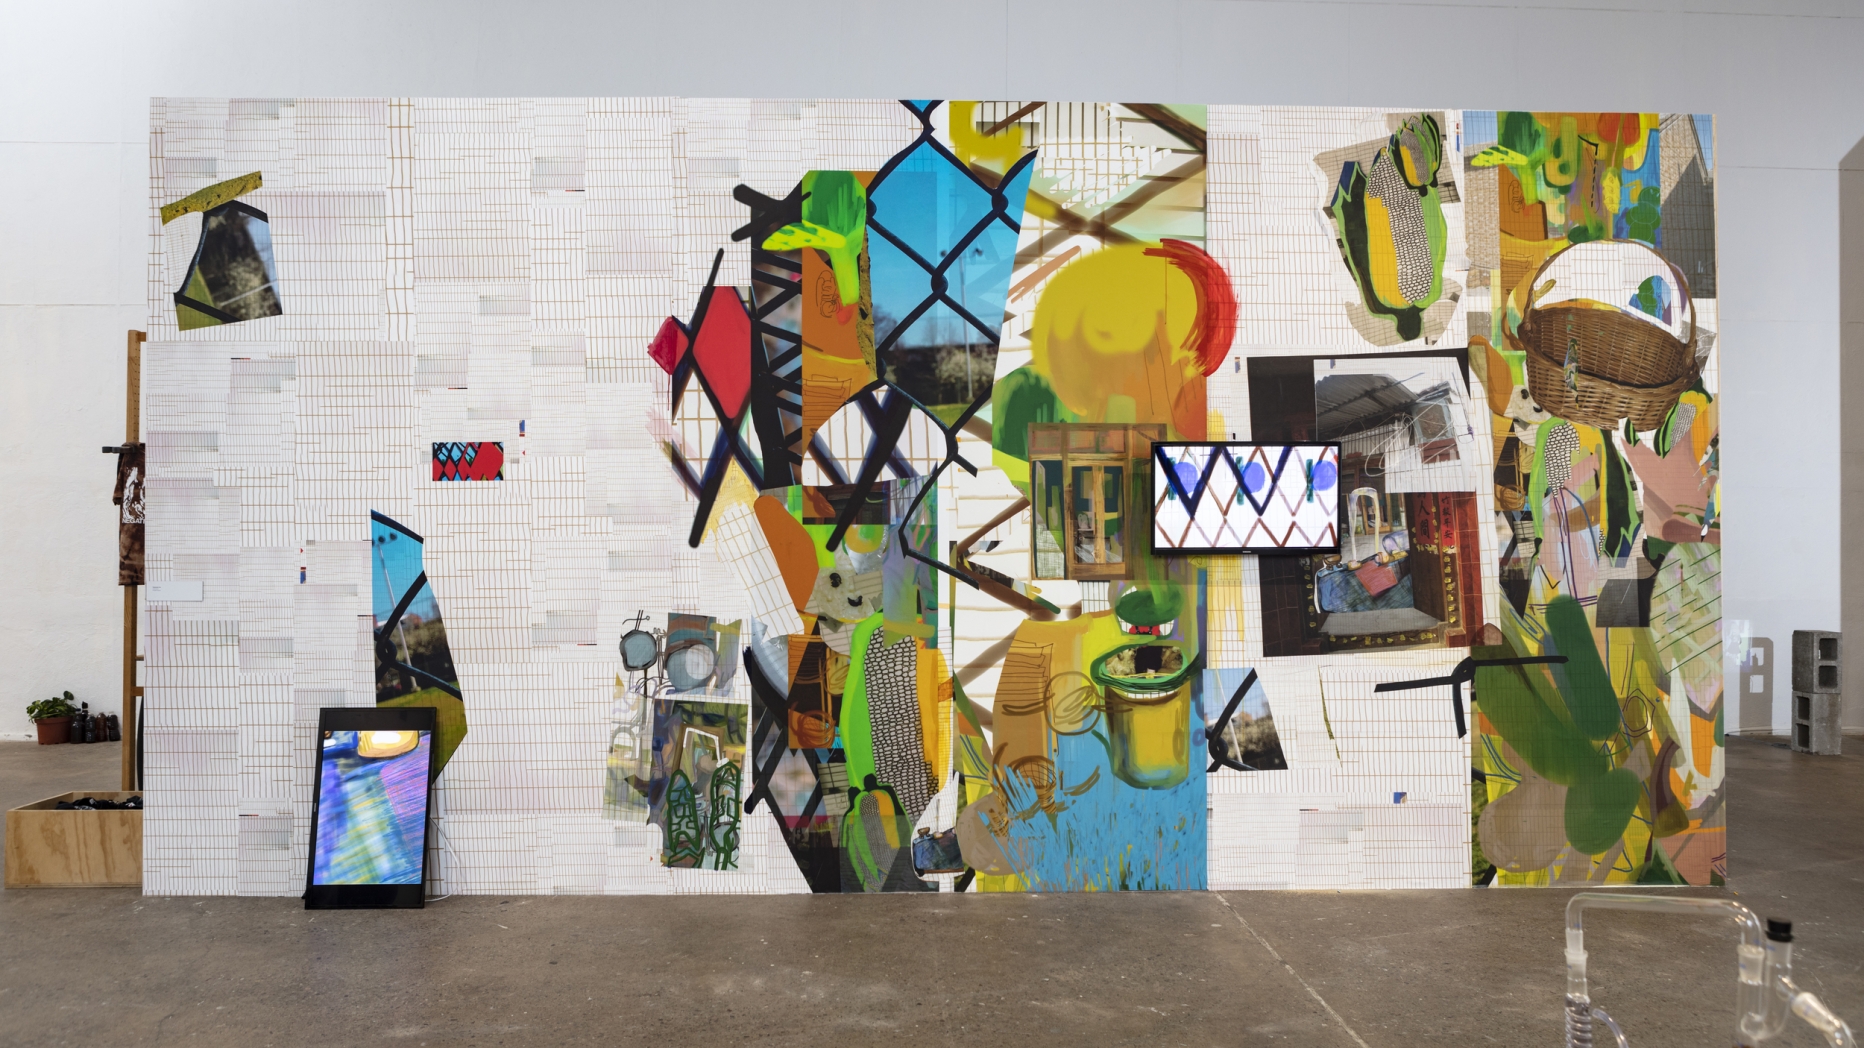 Mural wall with abstract collage of colors and patterns with screens displaying similar imagery